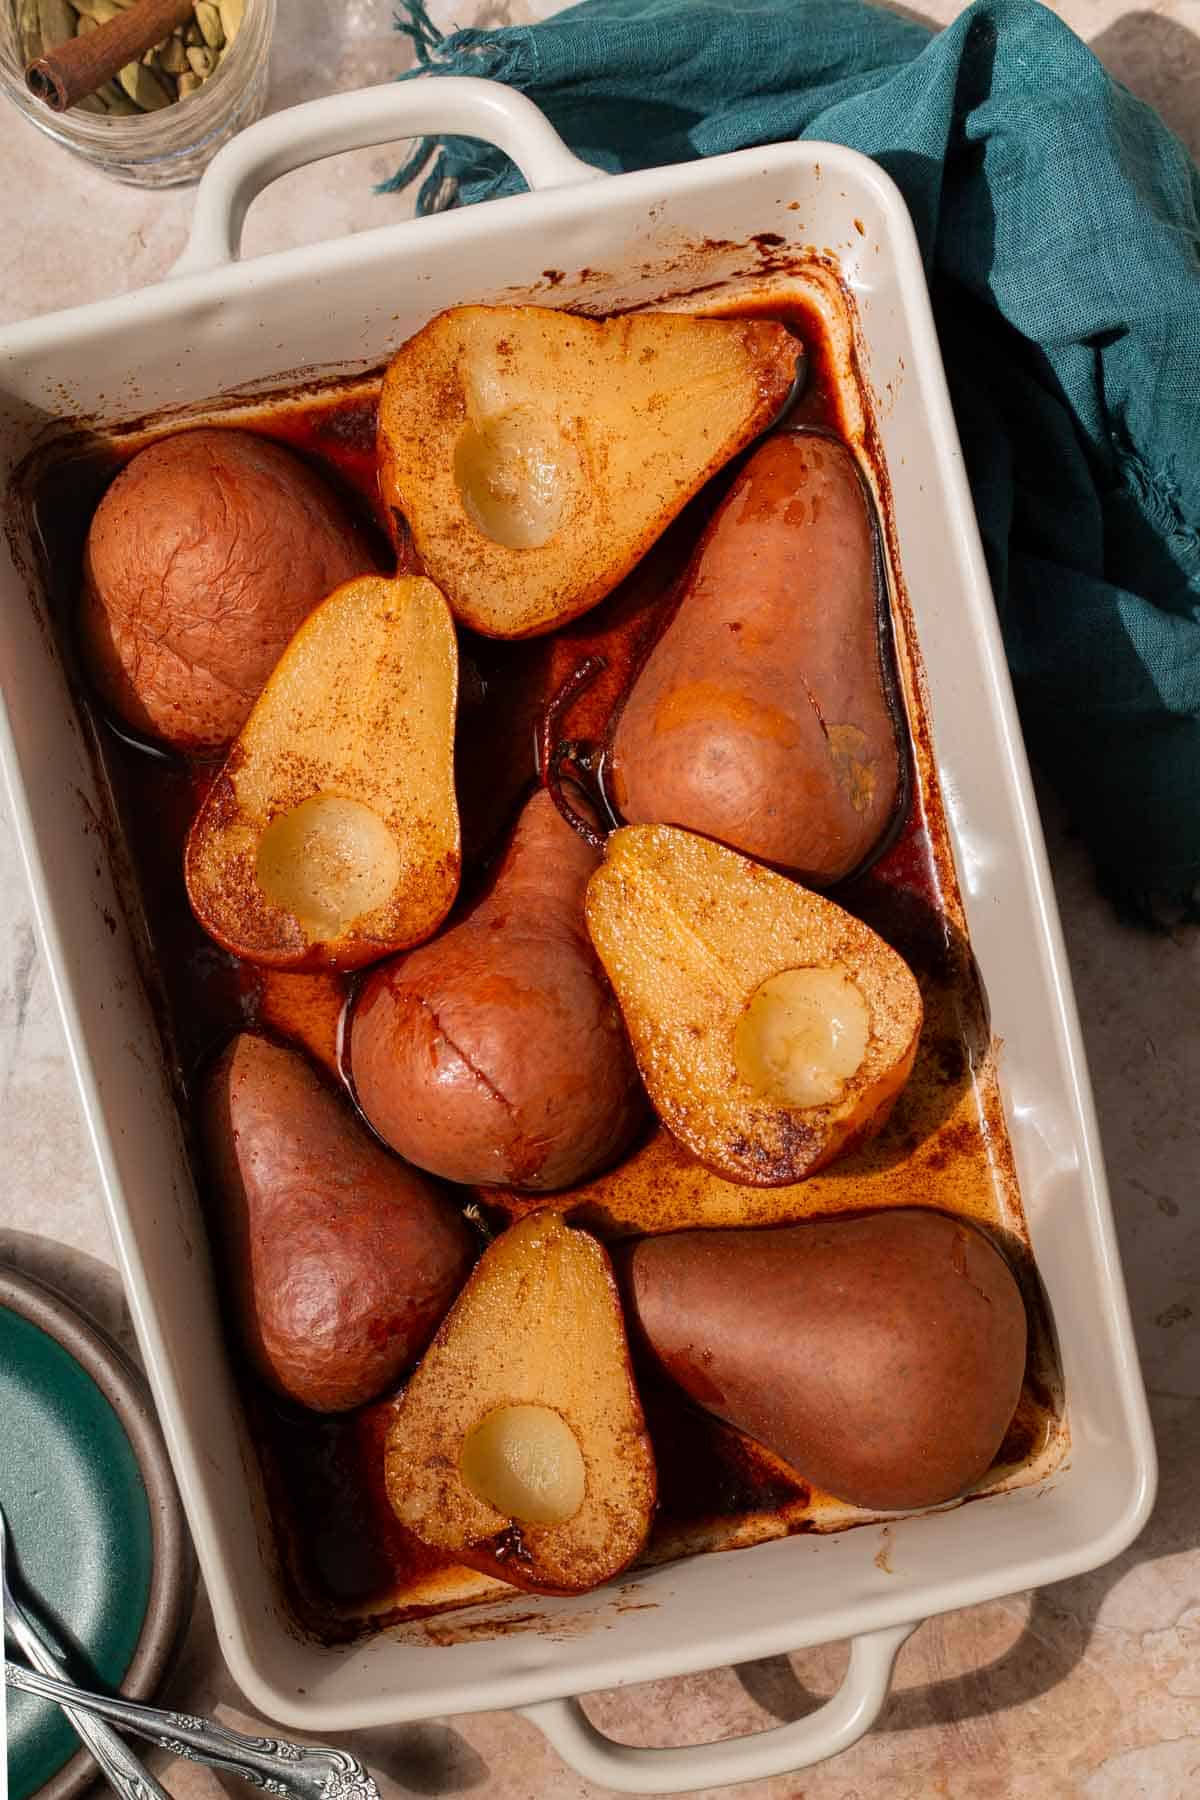 Baked pears in a white baking dish with half of the pears cut-side down. Half of the pears are flipped to show the golden edges.